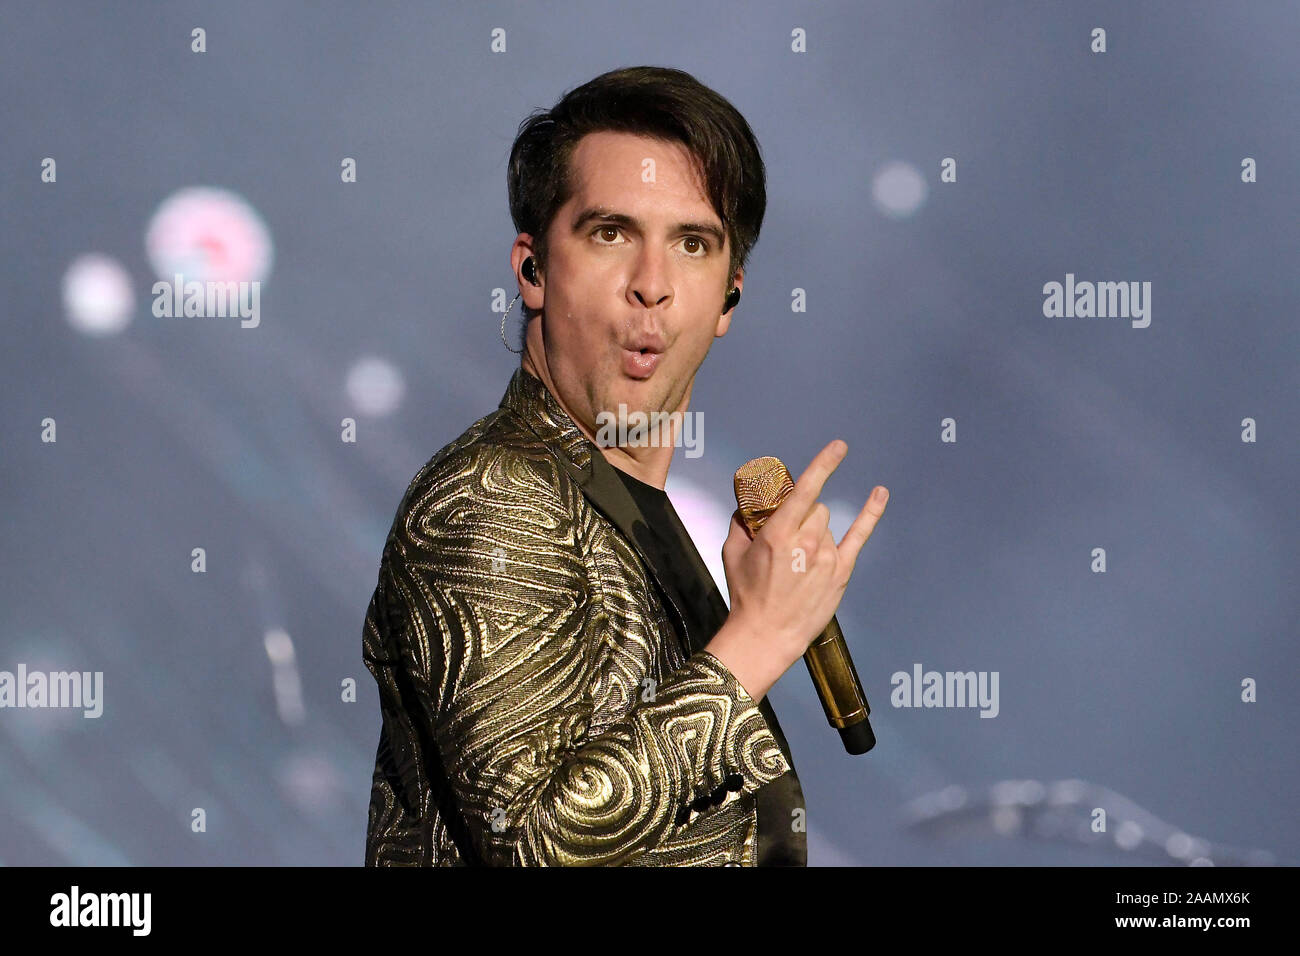 Rio de Janeiro, Brazil, October 3, 2019. Lead singer Brendon Urie of Panic! At The Disco, during a concert at Rock in Rio 2019 in the city of Rio. Stock Photo